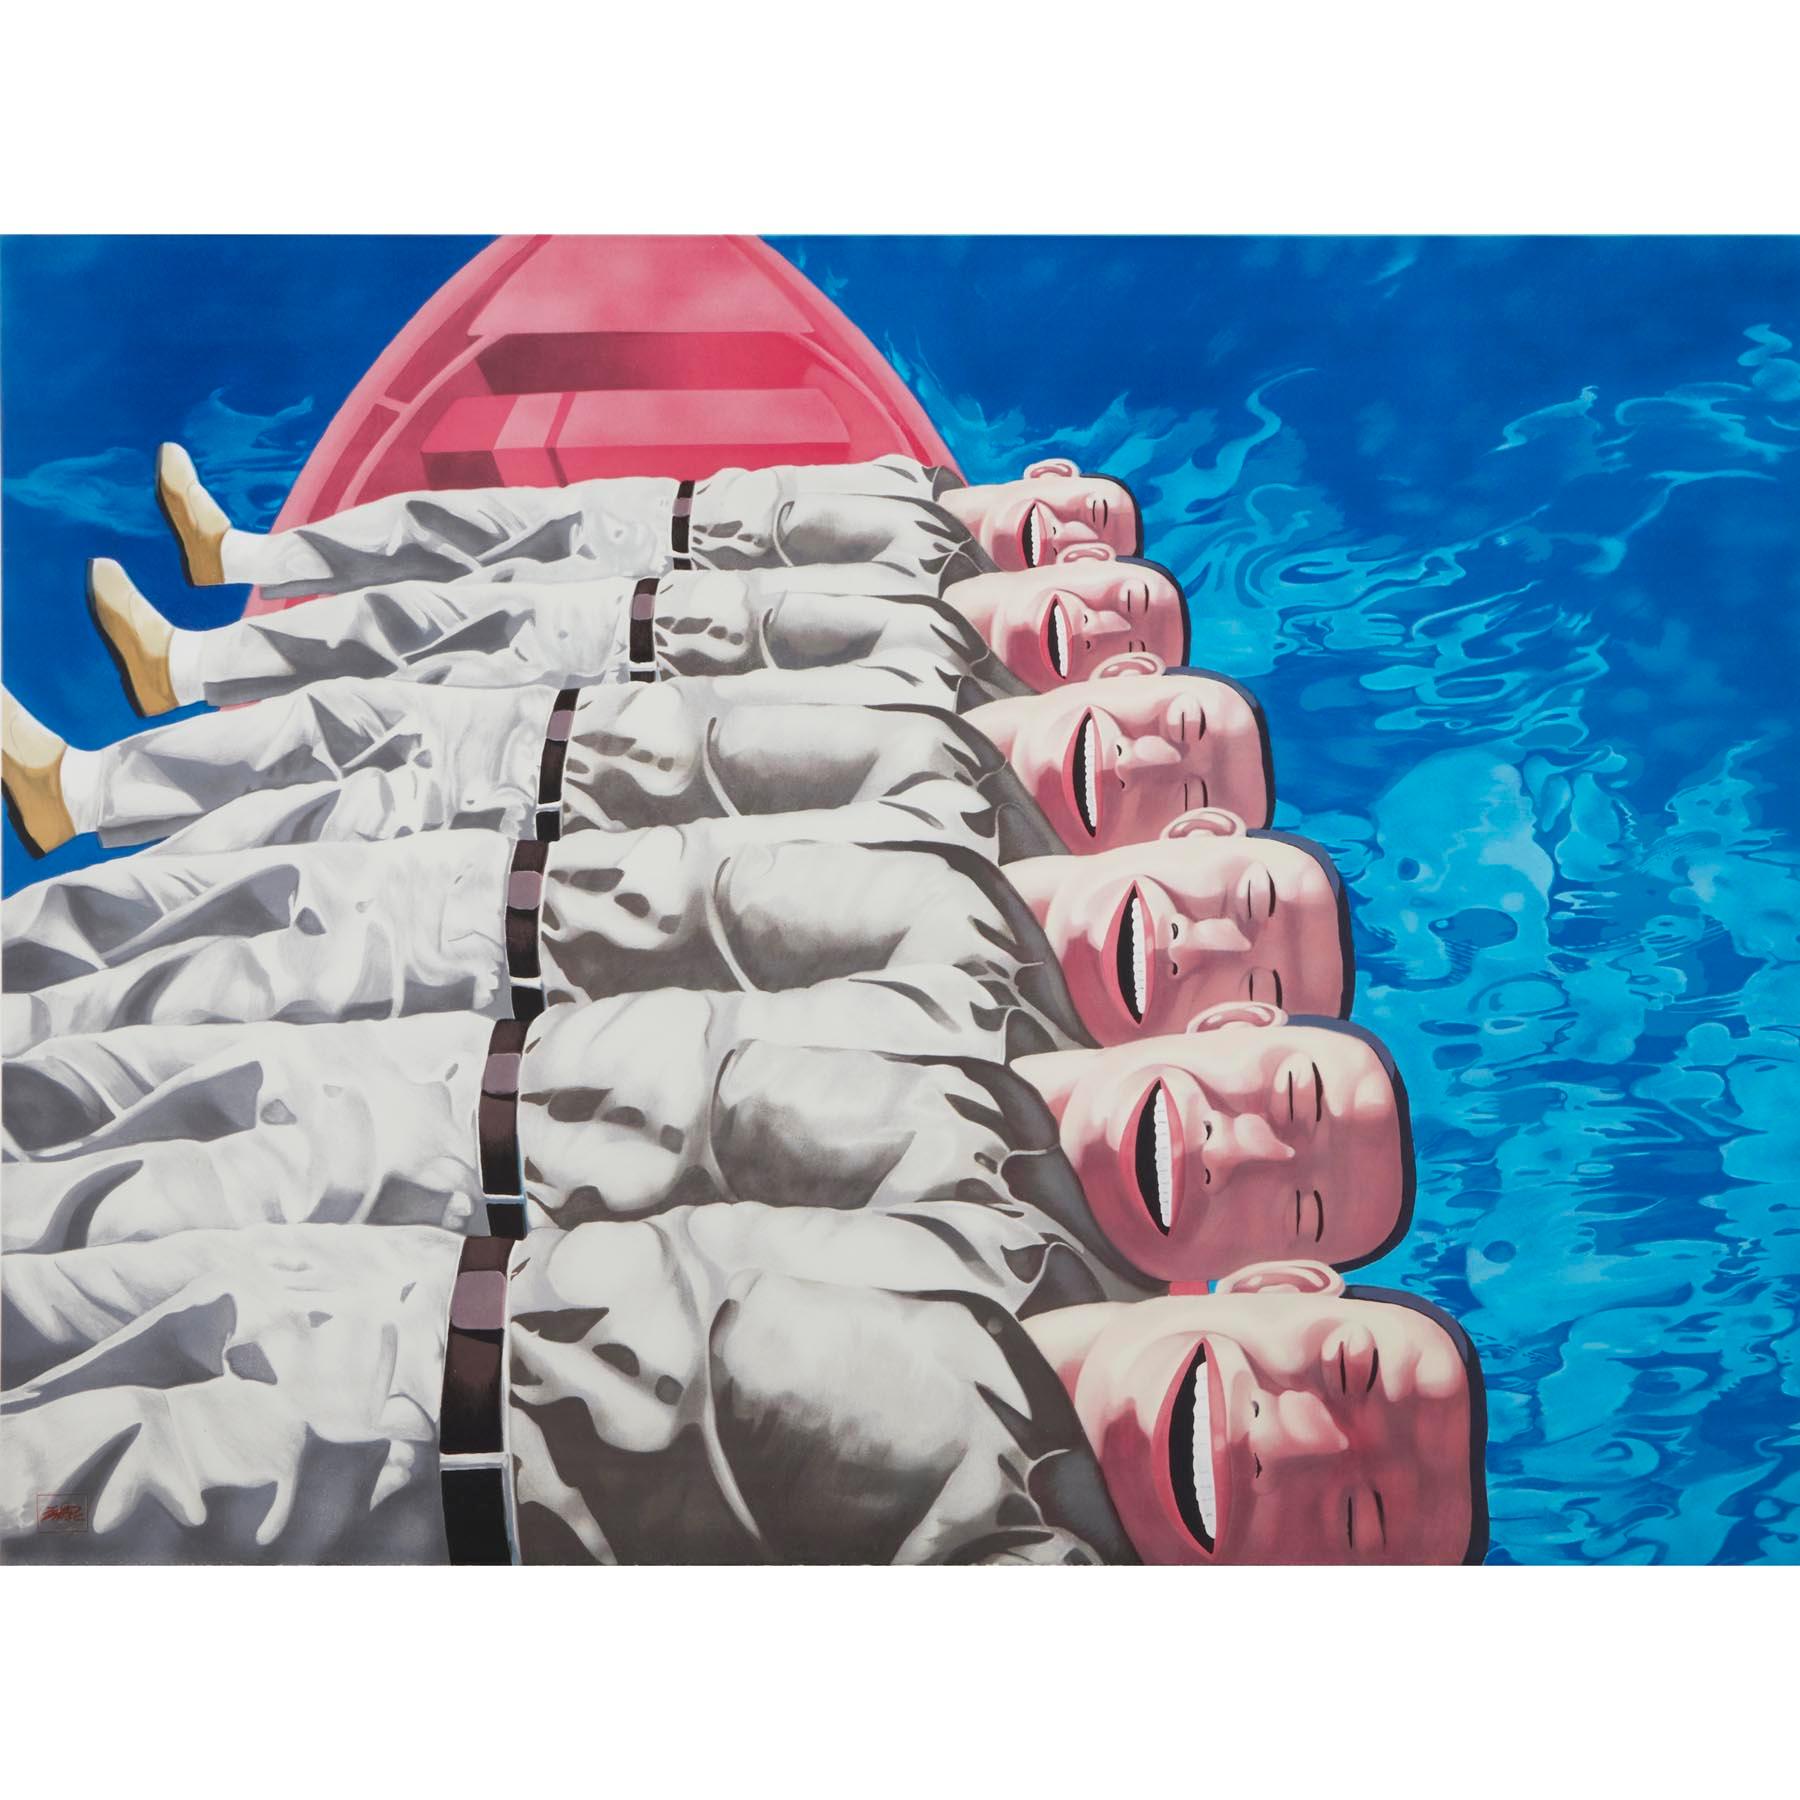 Red Boat, Yue Minjun- Contemporary Art, Lithograph, Limited Edition, Chinese For Sale 1